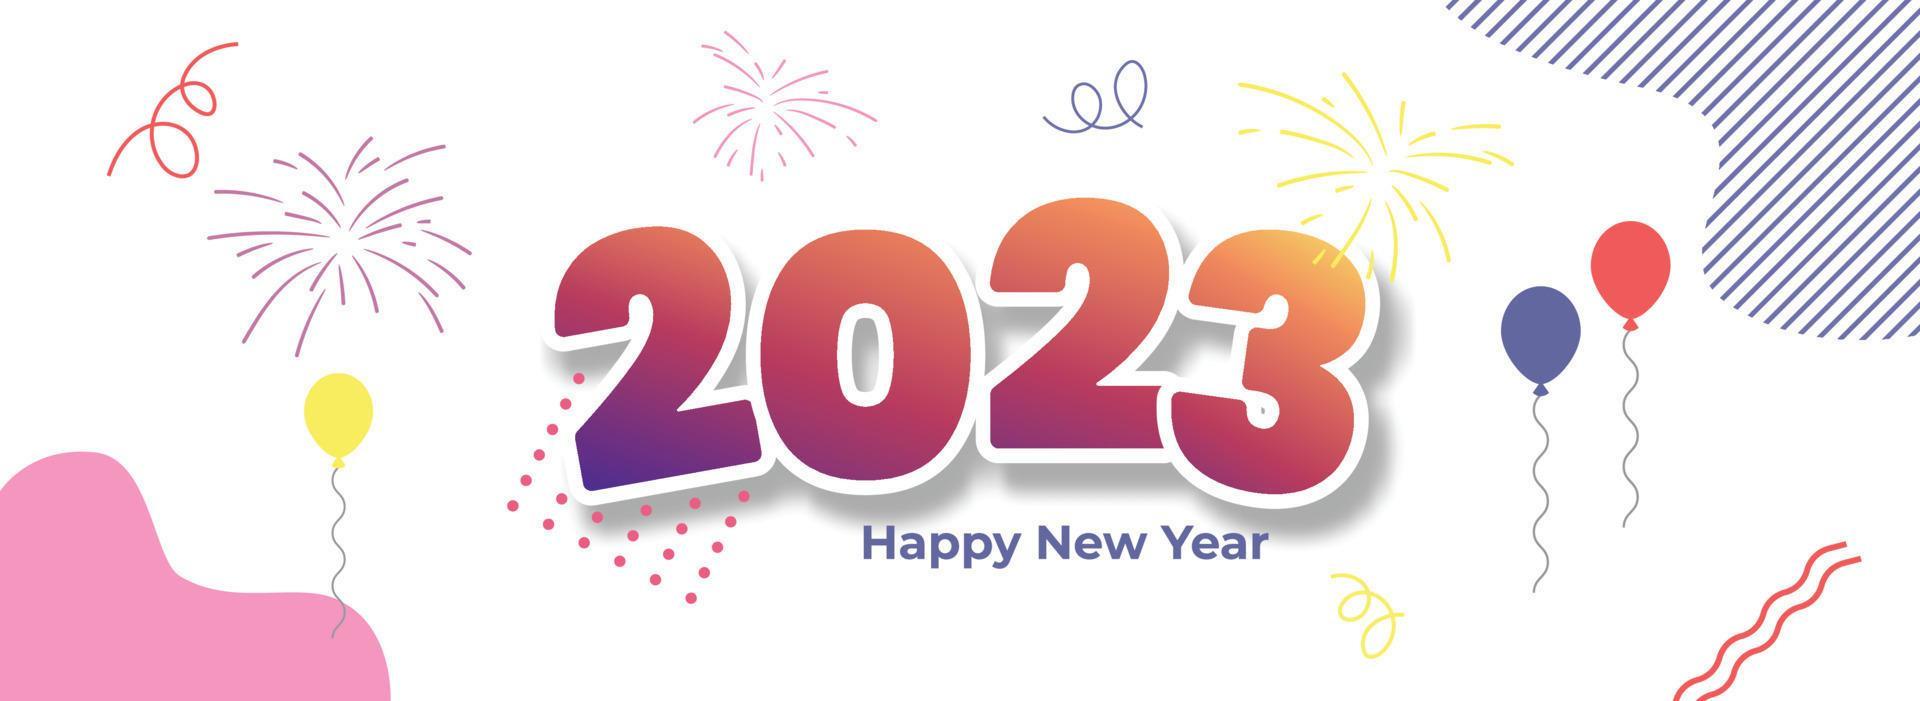 Amazing Happy New Year 2023 Facebook Cover Photo